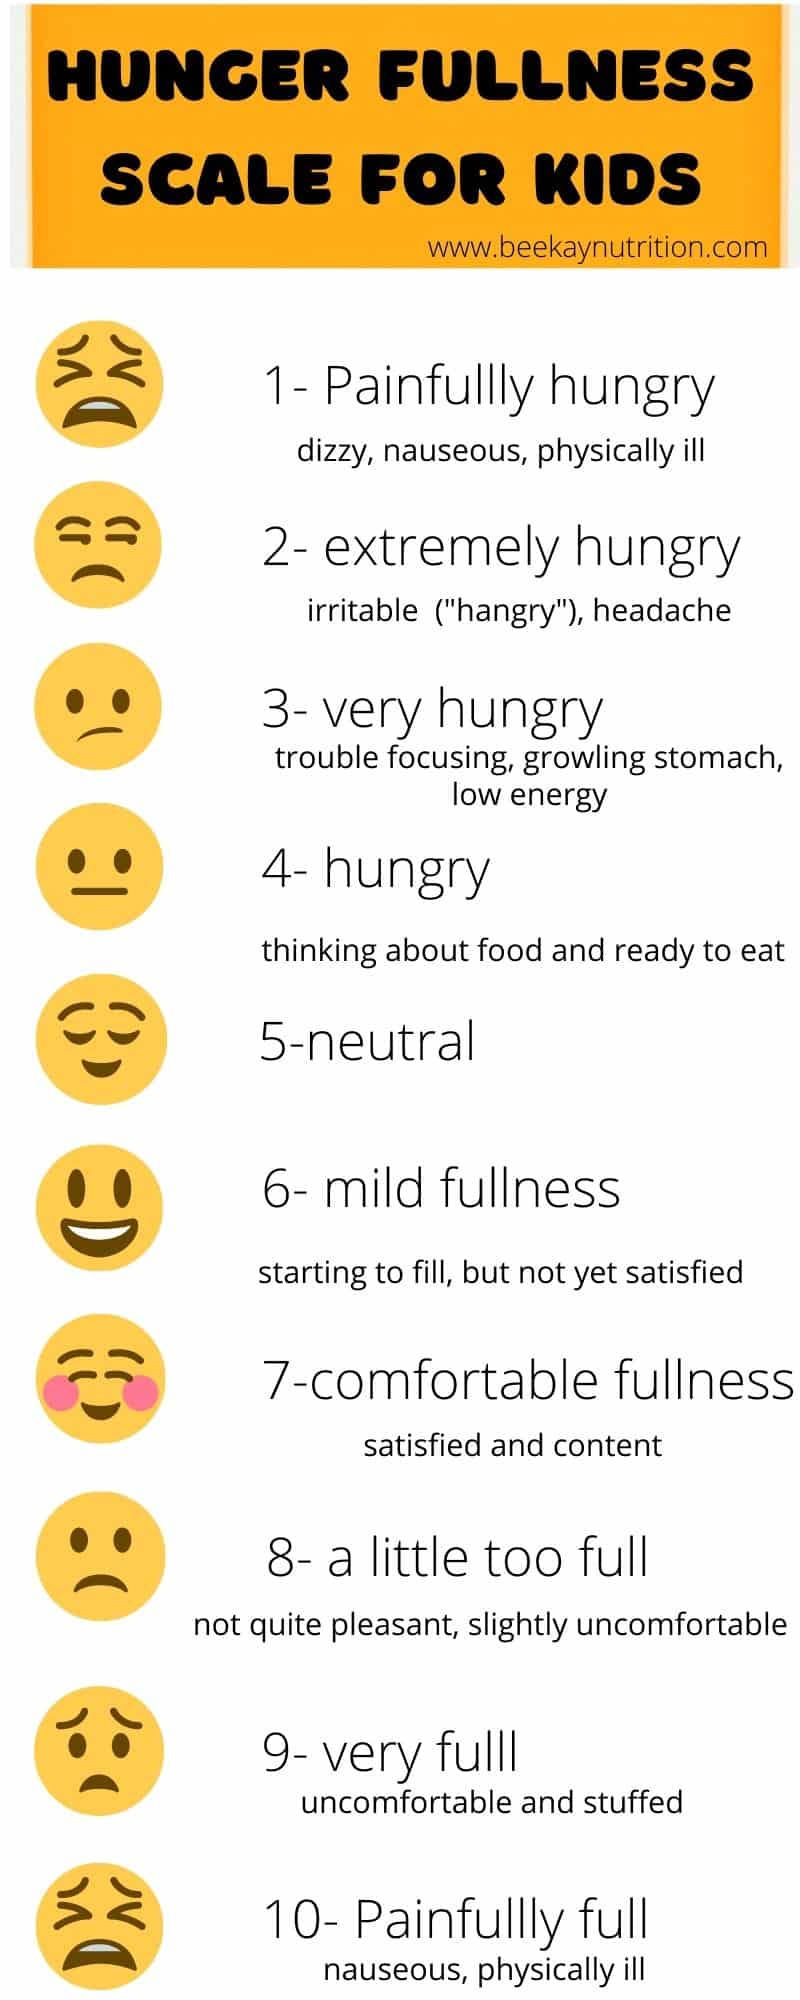 Hunger Fullness Scale for Kids rating from one-super hungry, to ten- super stuffed